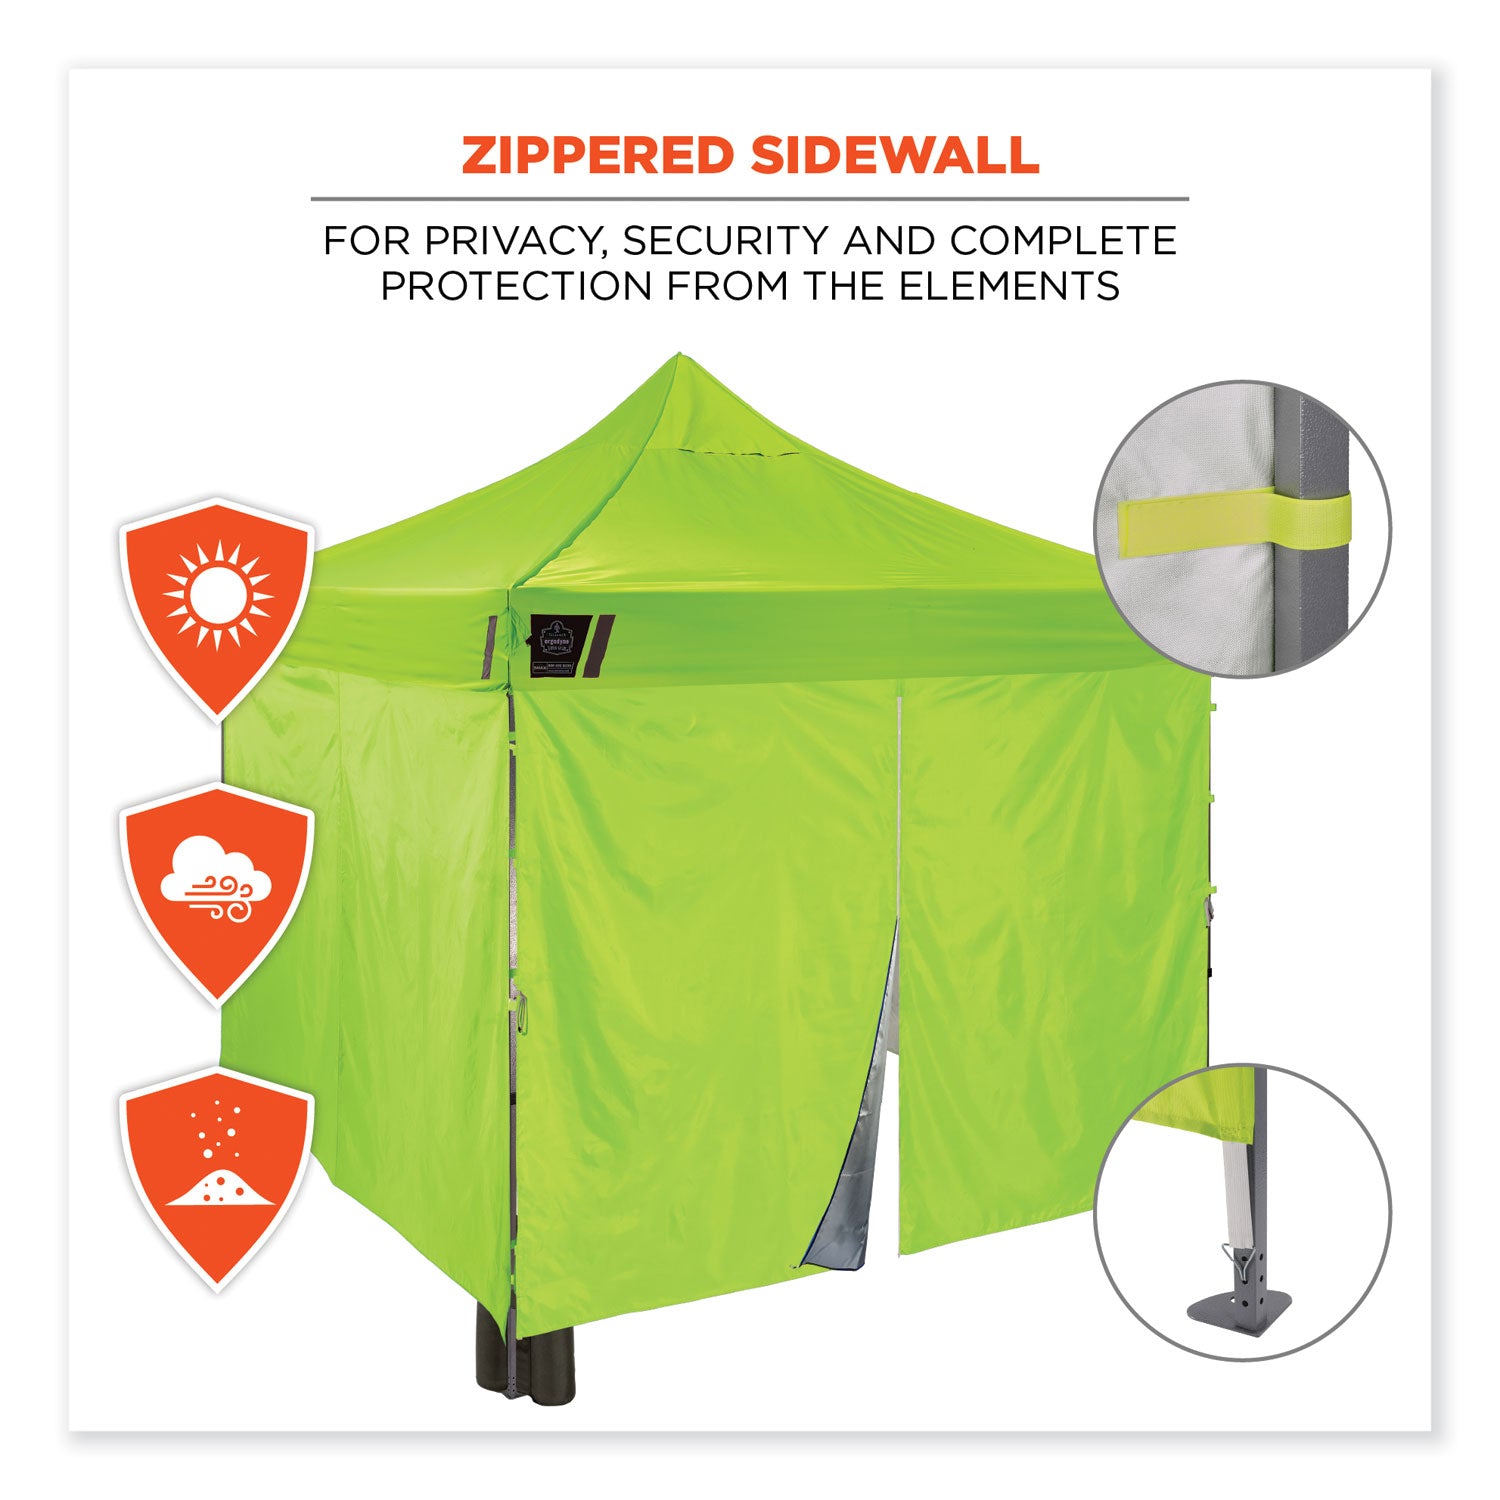 shax-6053-enclosed-pop-up-tent-kit-single-skin-10-ft-x-10-ft-polyester-steel-lime-ships-in-1-3-business-days_ego12976 - 4